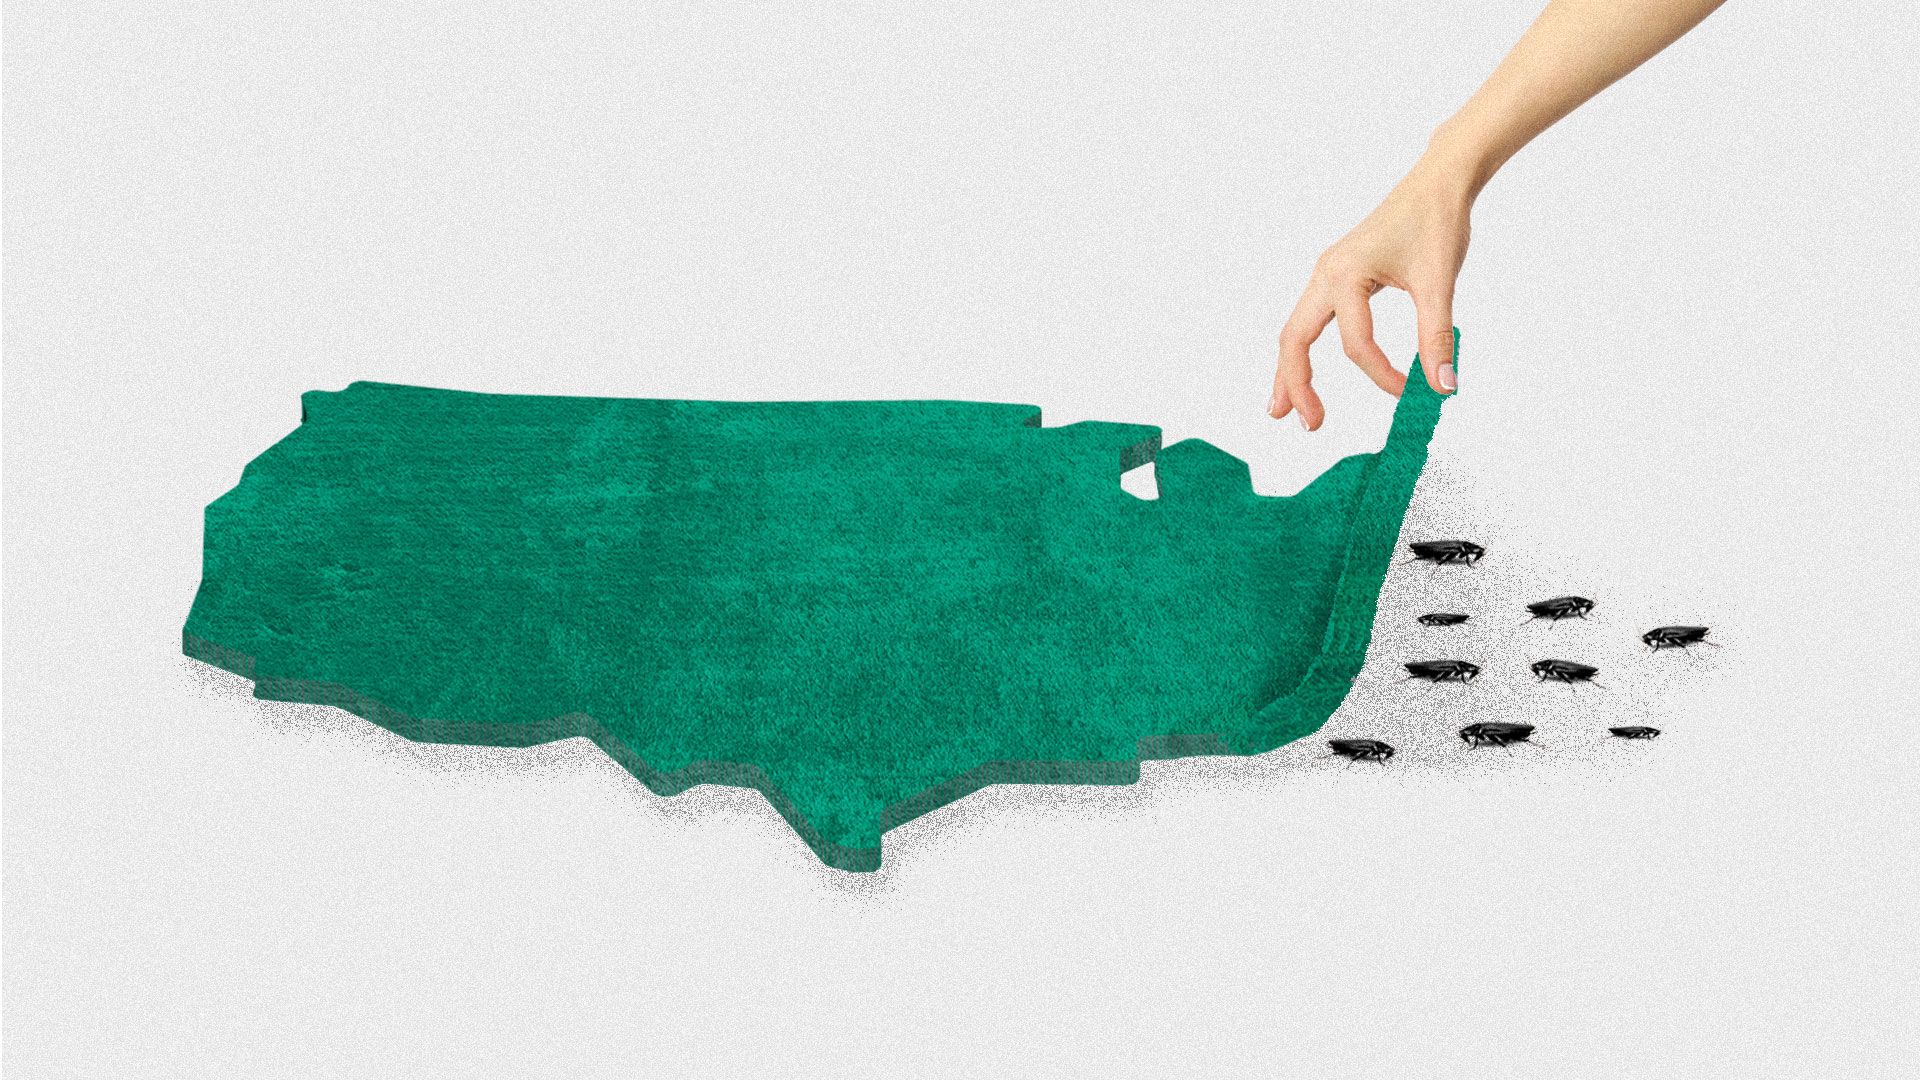 Illustration of the United States as a rug, a hand is pulling it up and revealing cockroaches underneath.